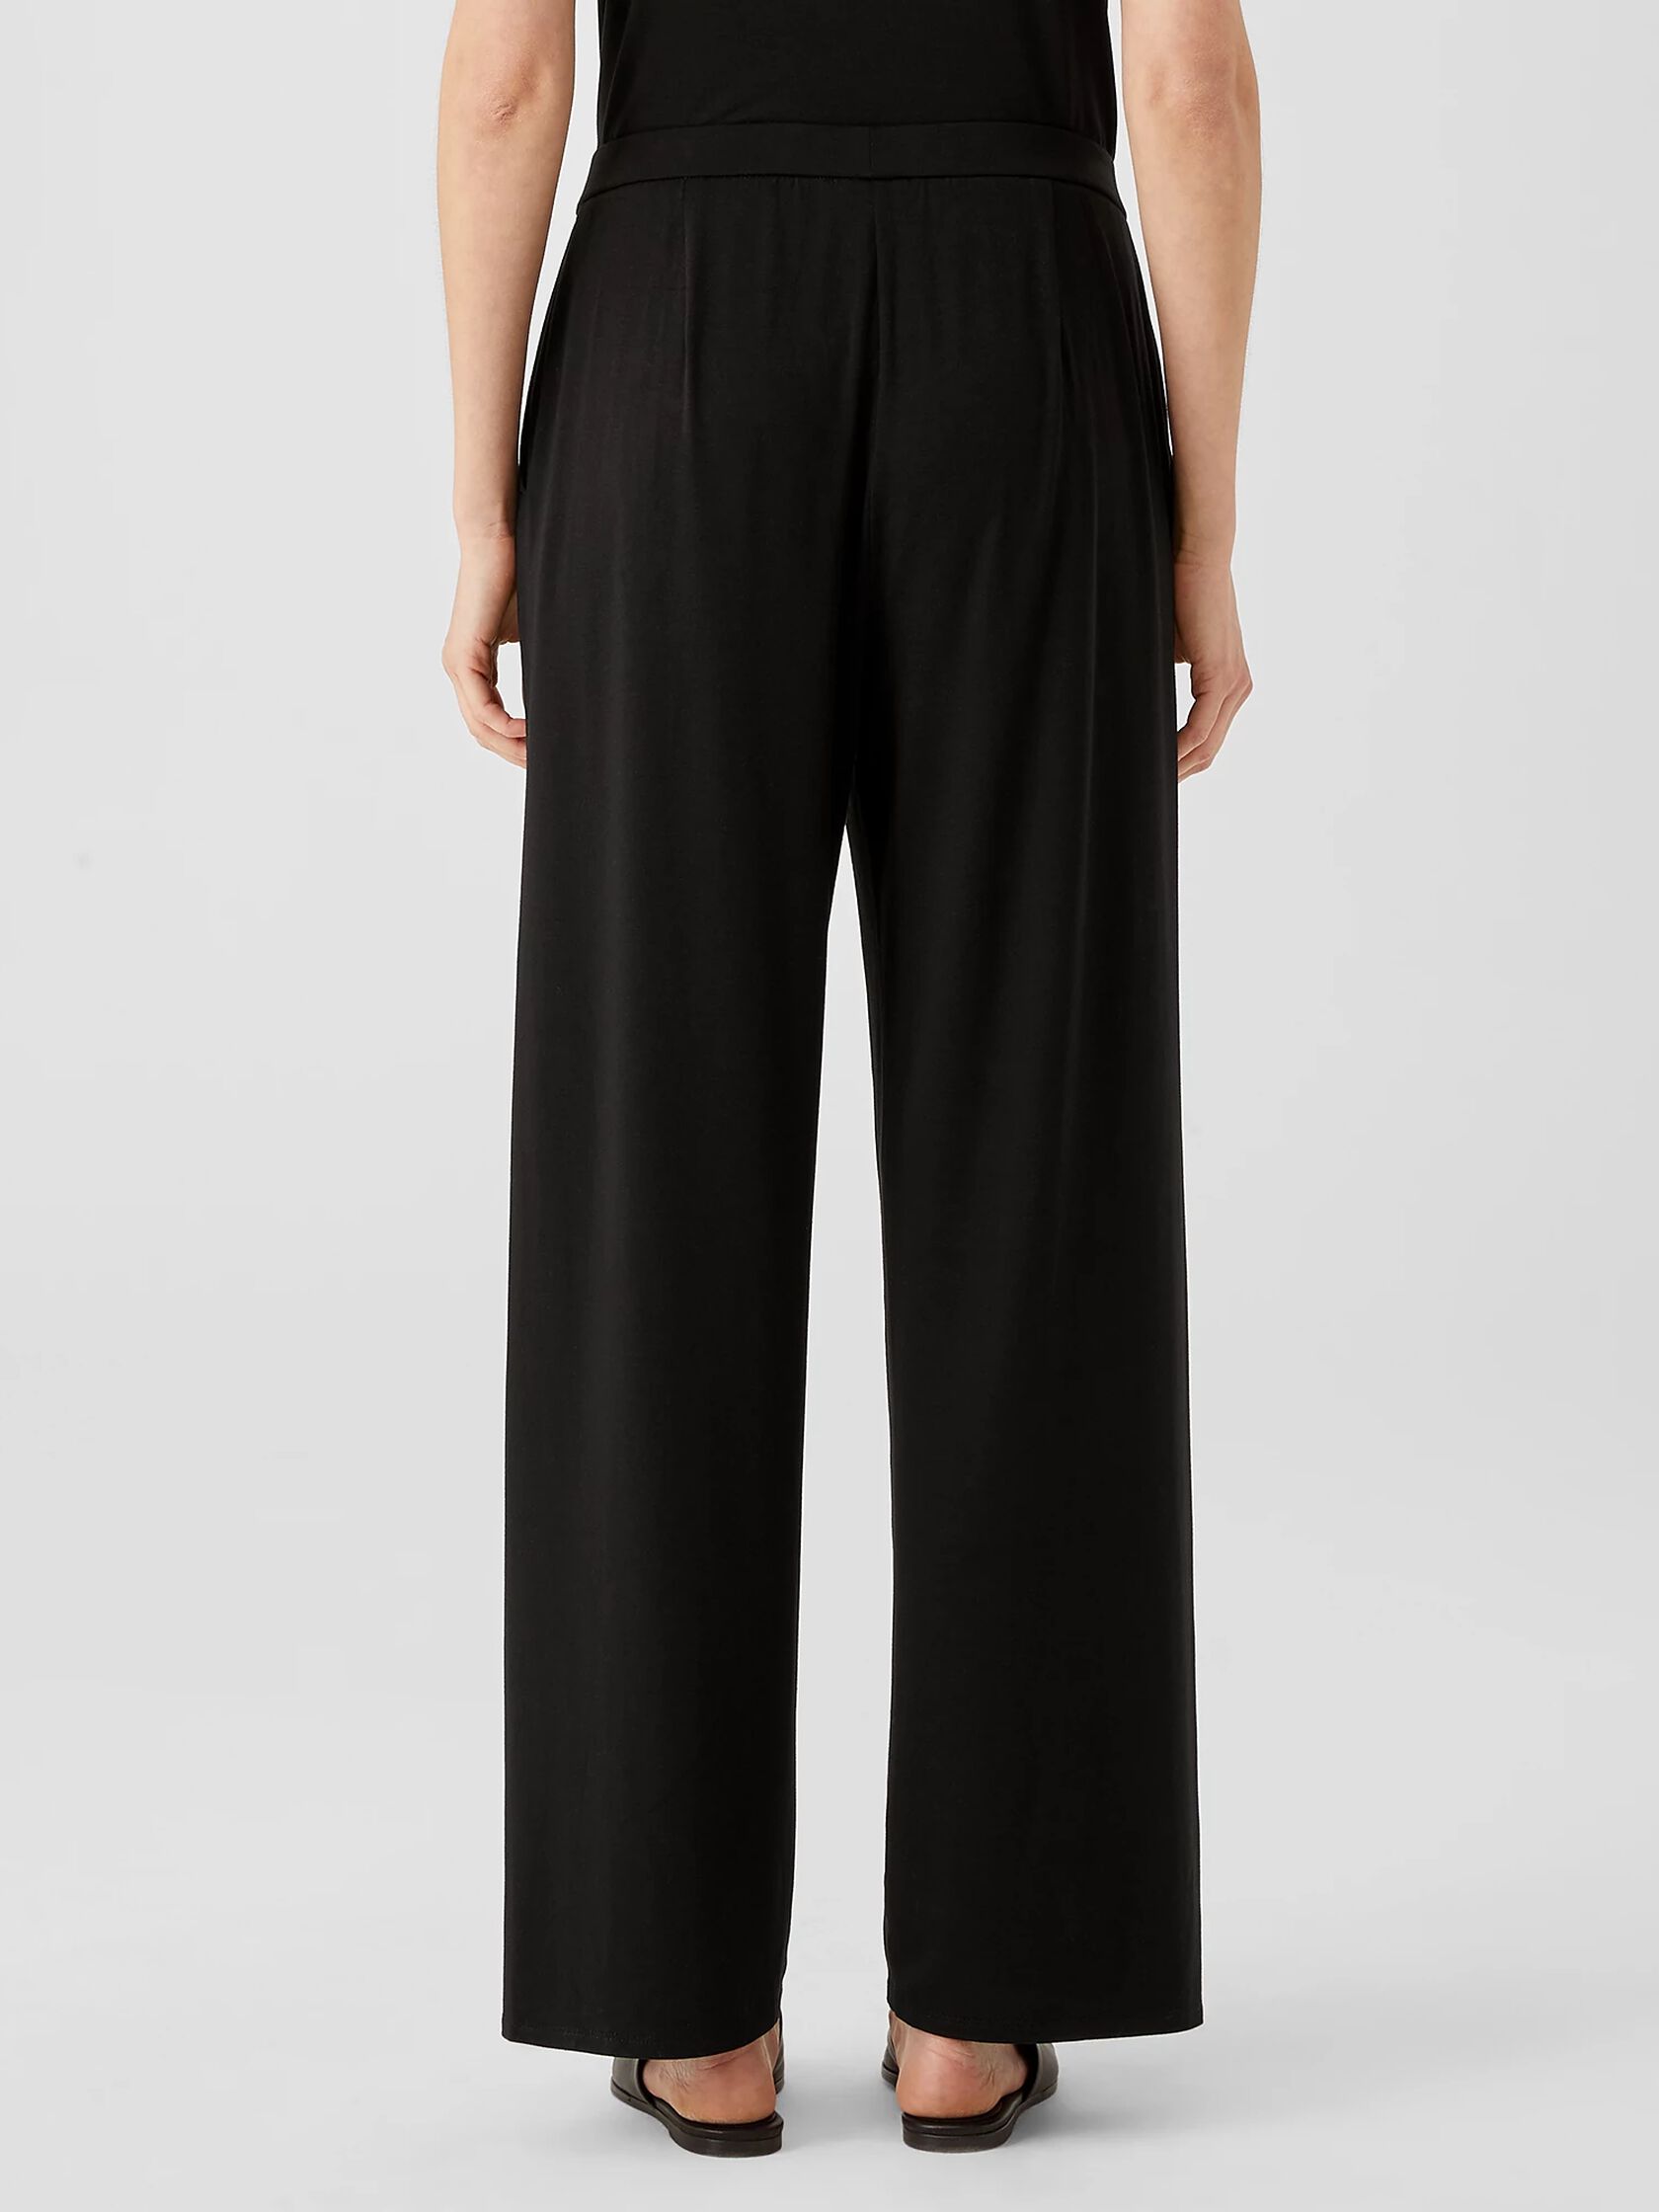 Fine Jersey Straight Pant | EILEEN FISHER